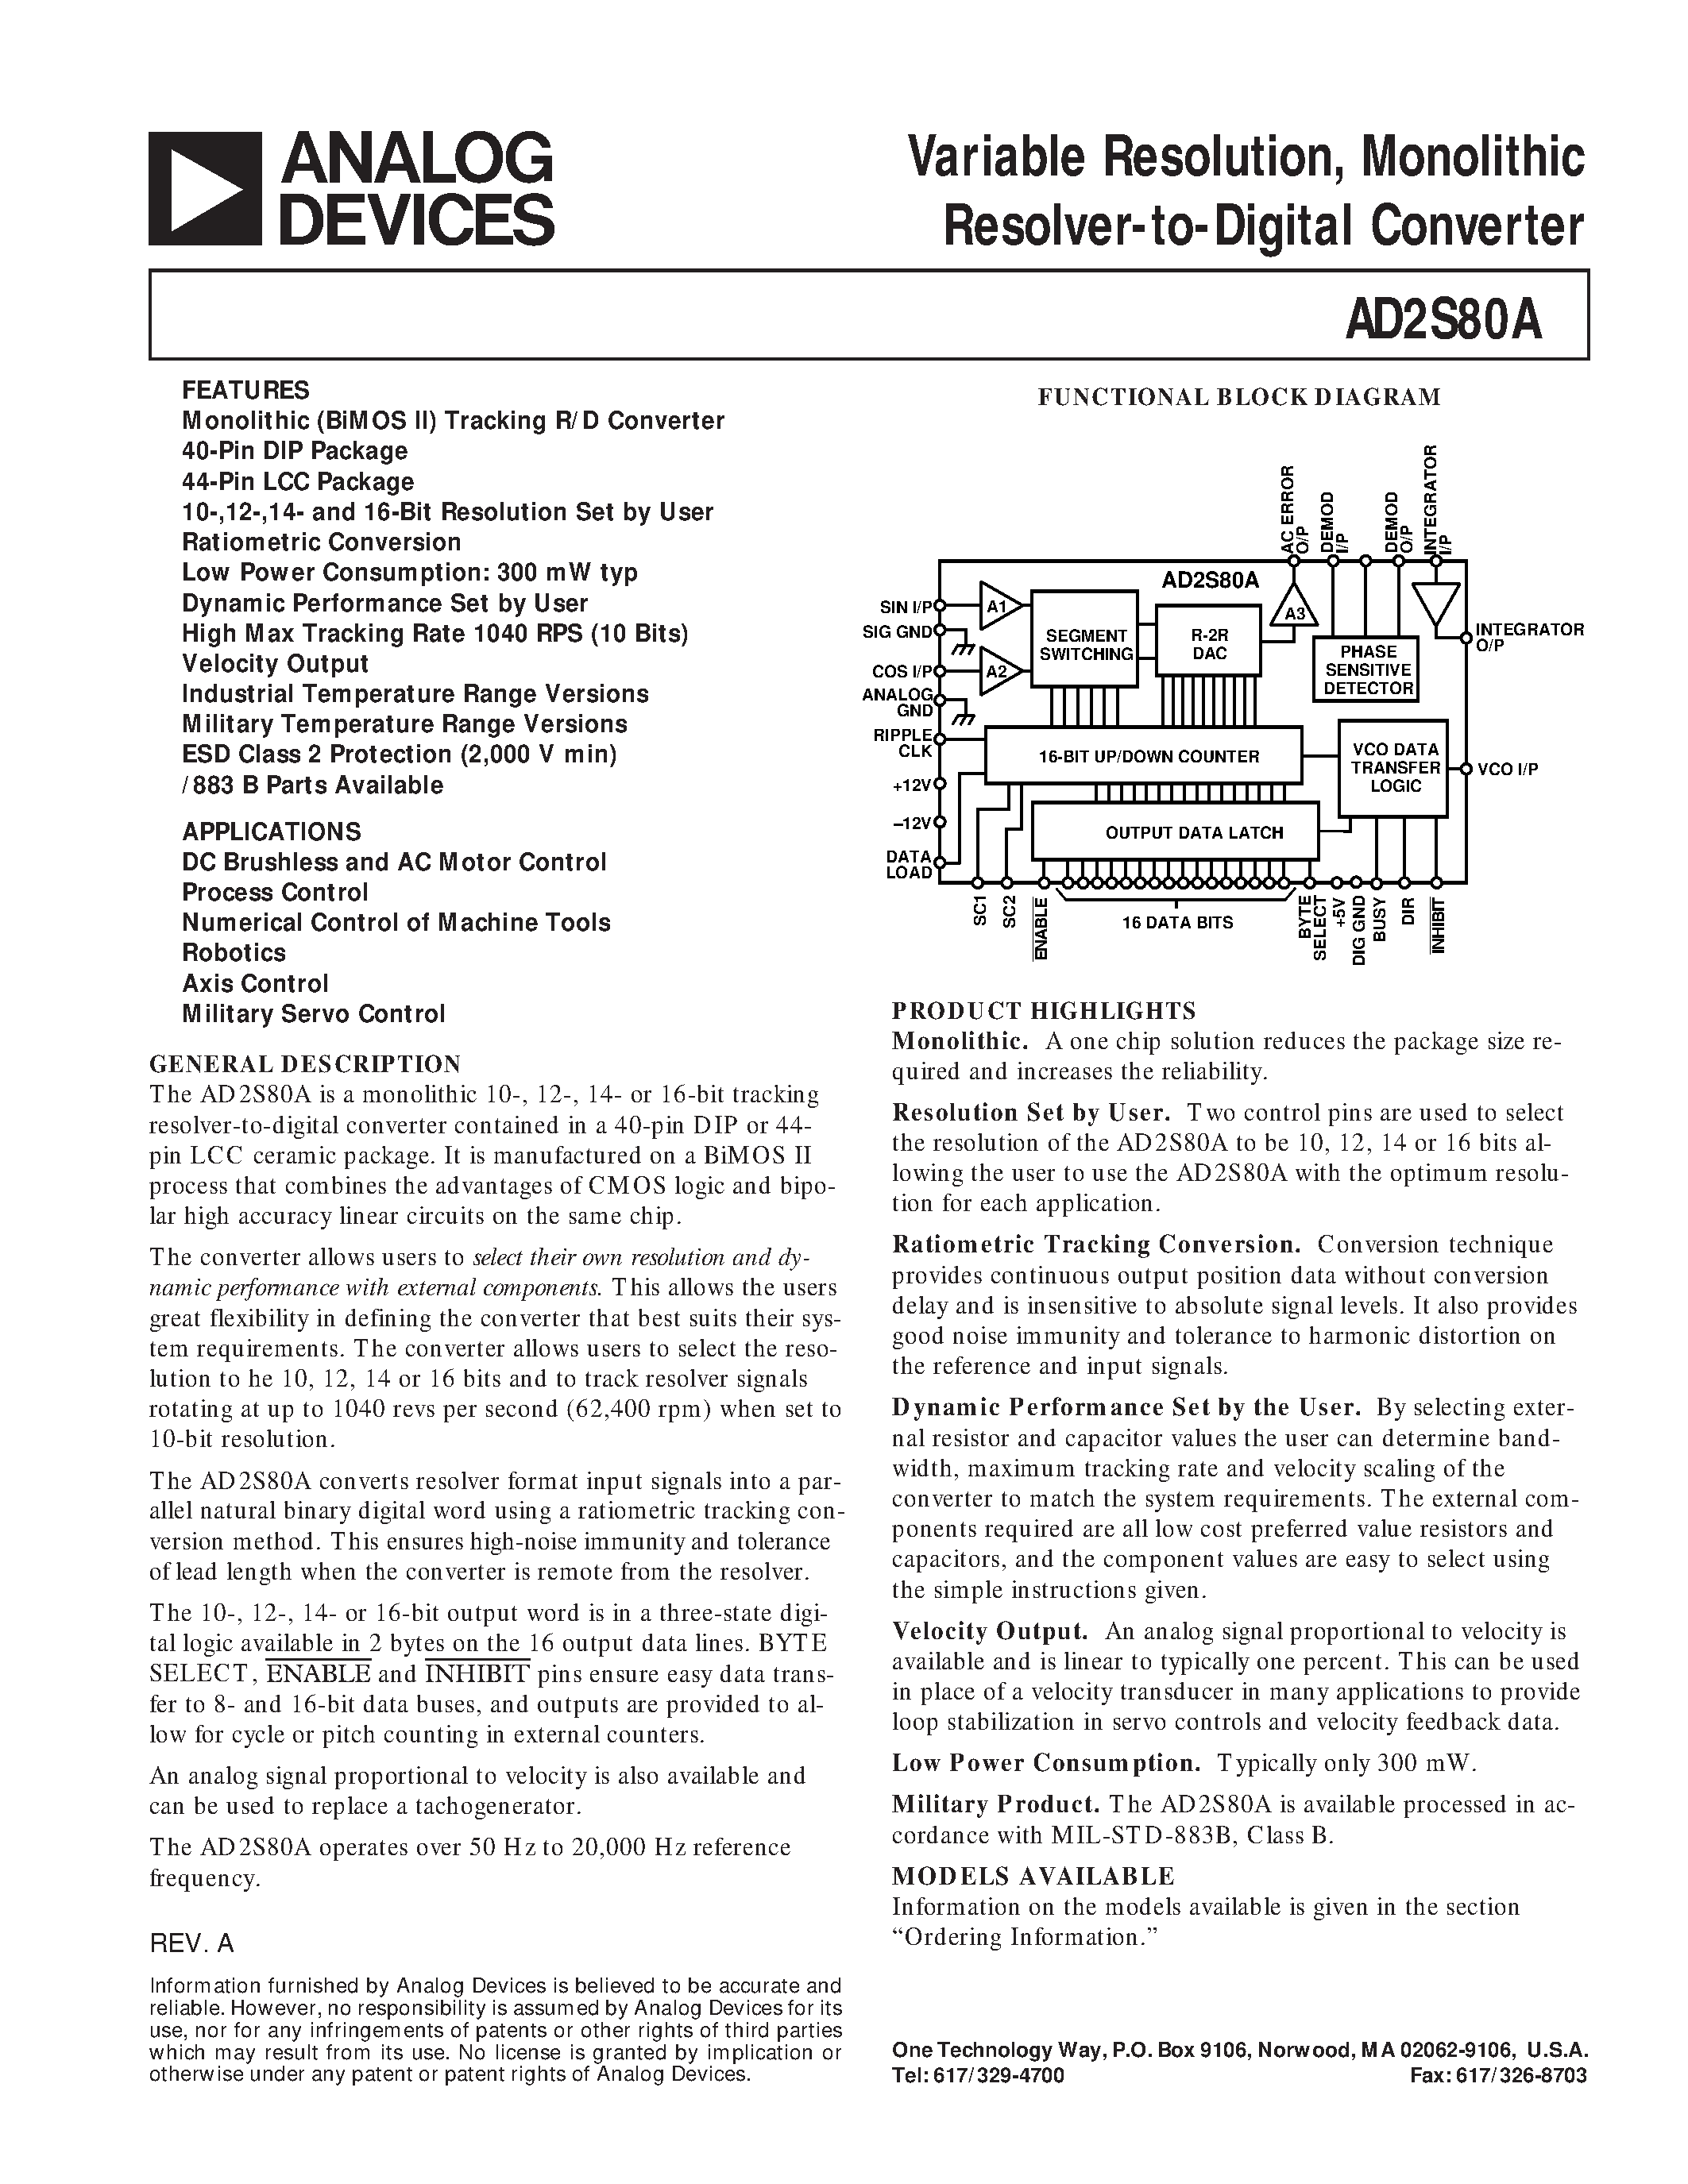 Datasheet AD2S80A - Variable Resolution/ Monolithic Resolver-to-Digital Converter page 1